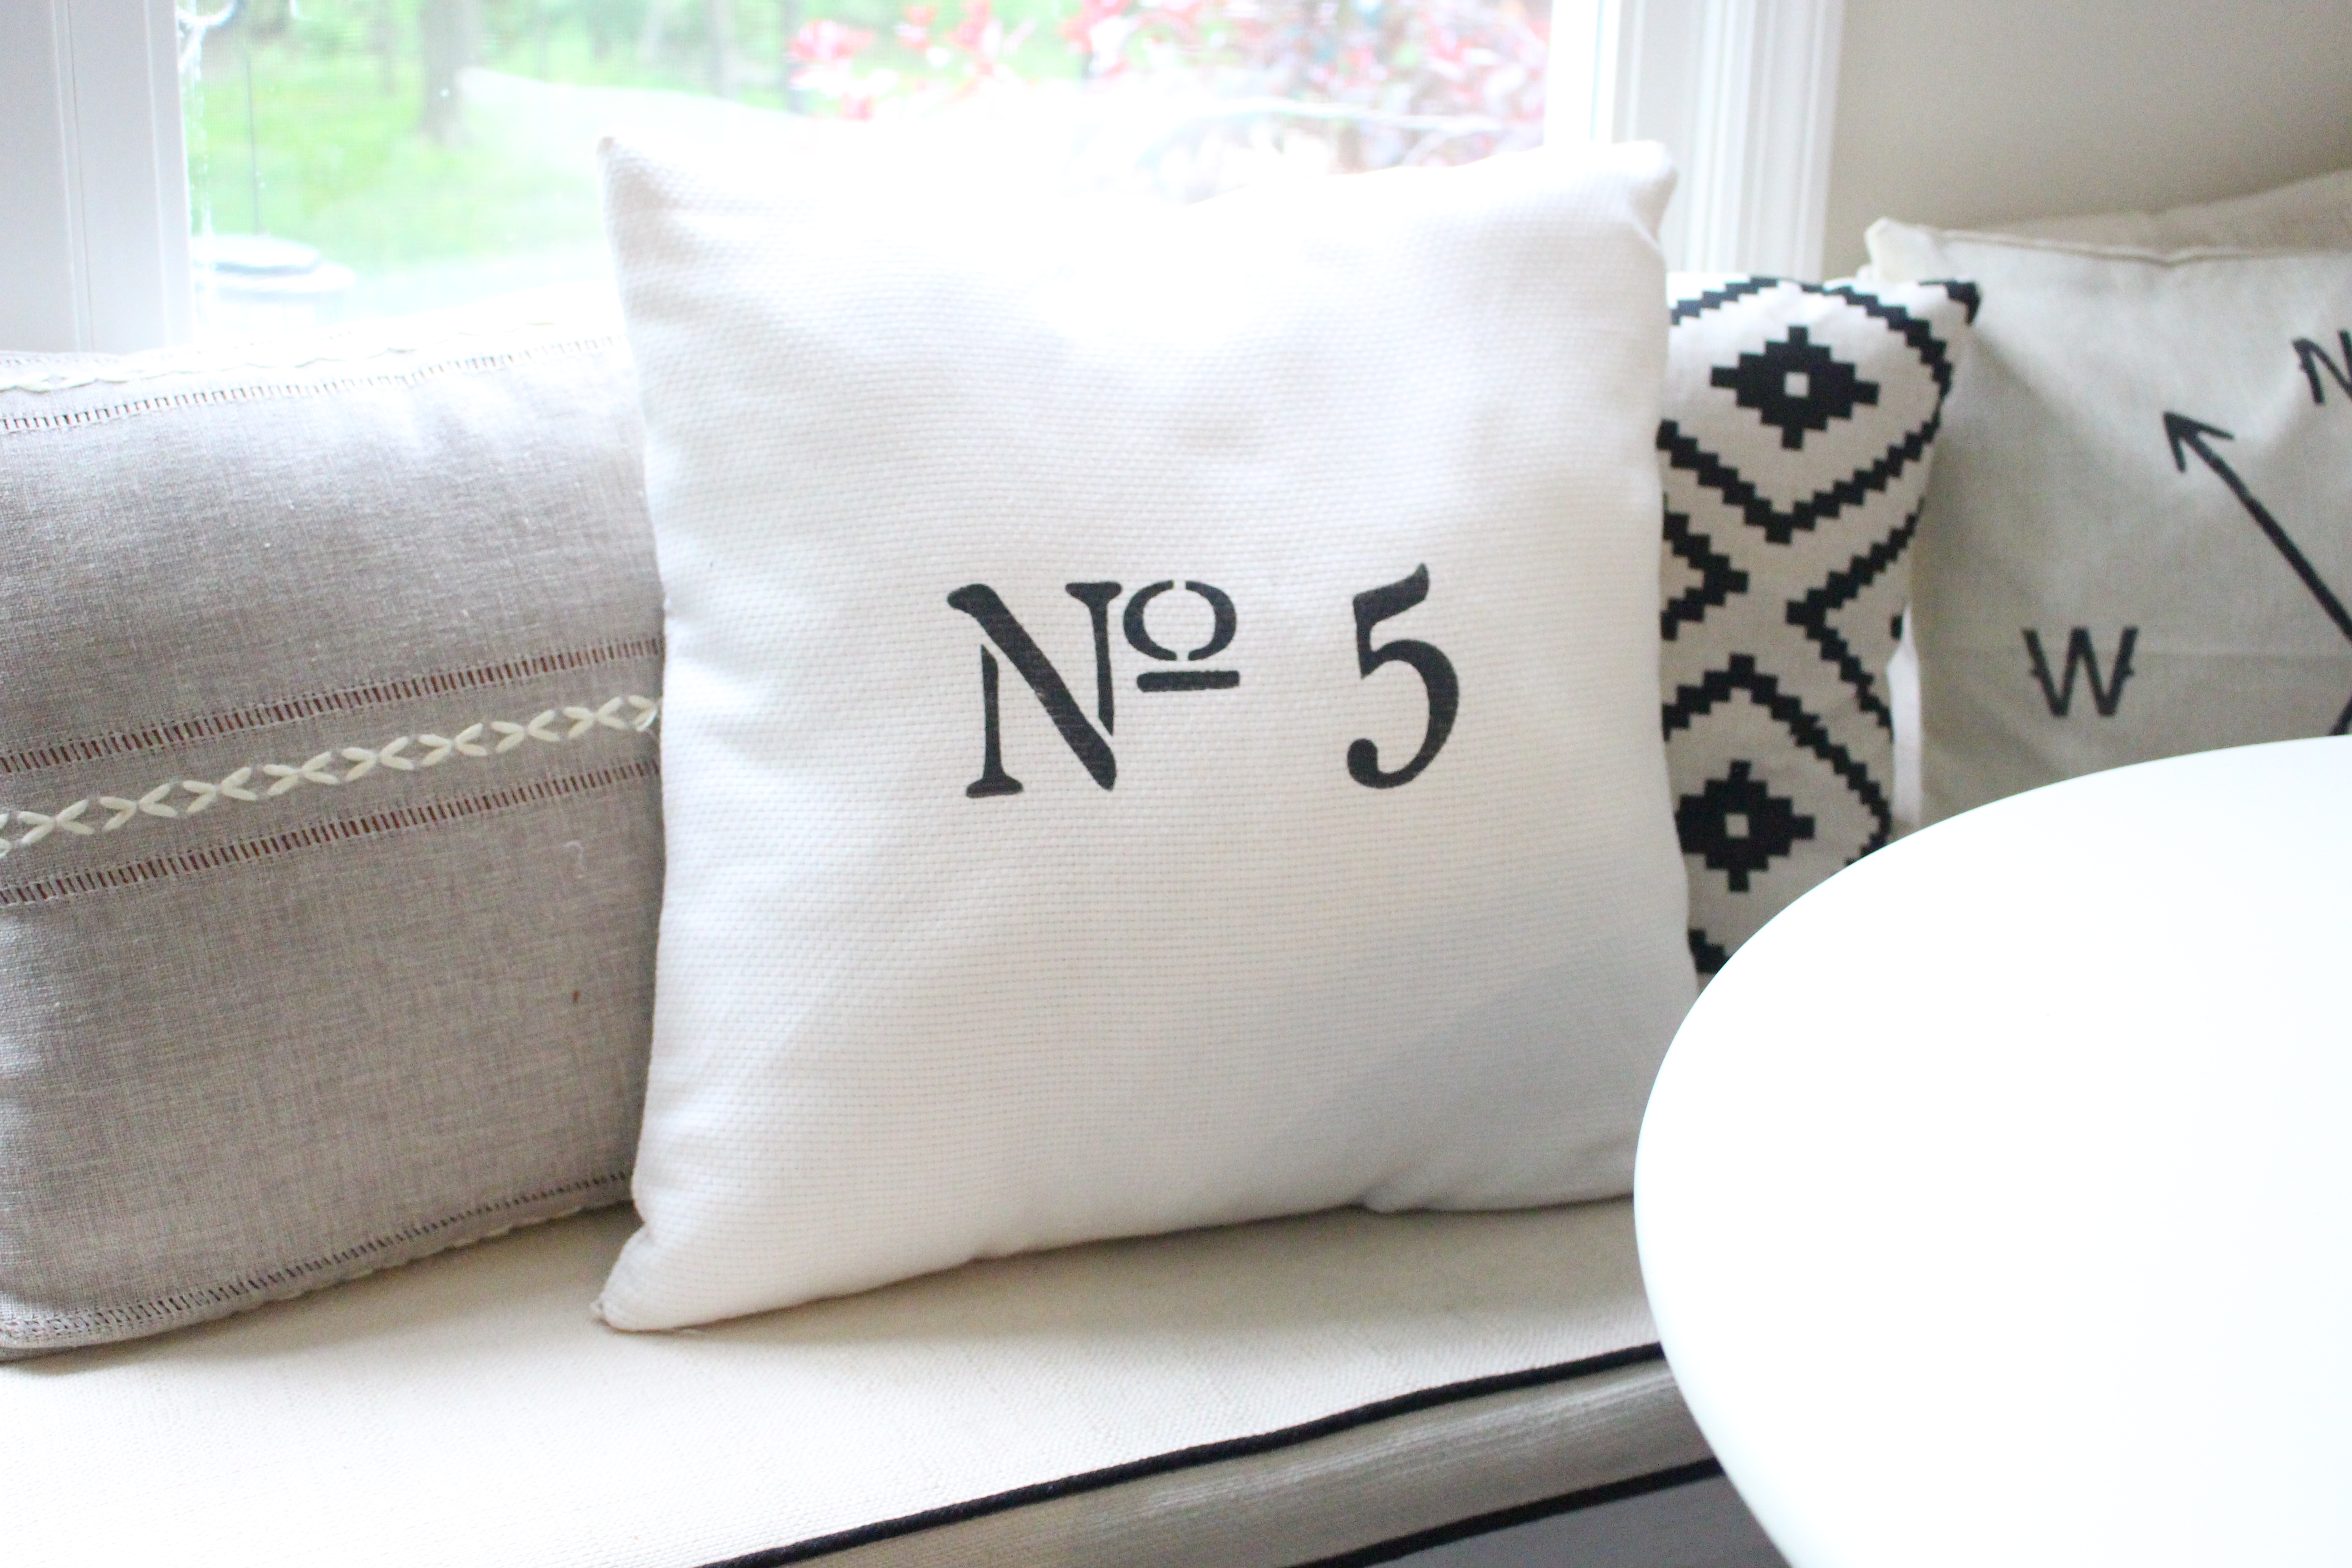 Finished Number Pillow Using a Stencil and Black Fabric Paint by www.whitecottagehomeandliving.com